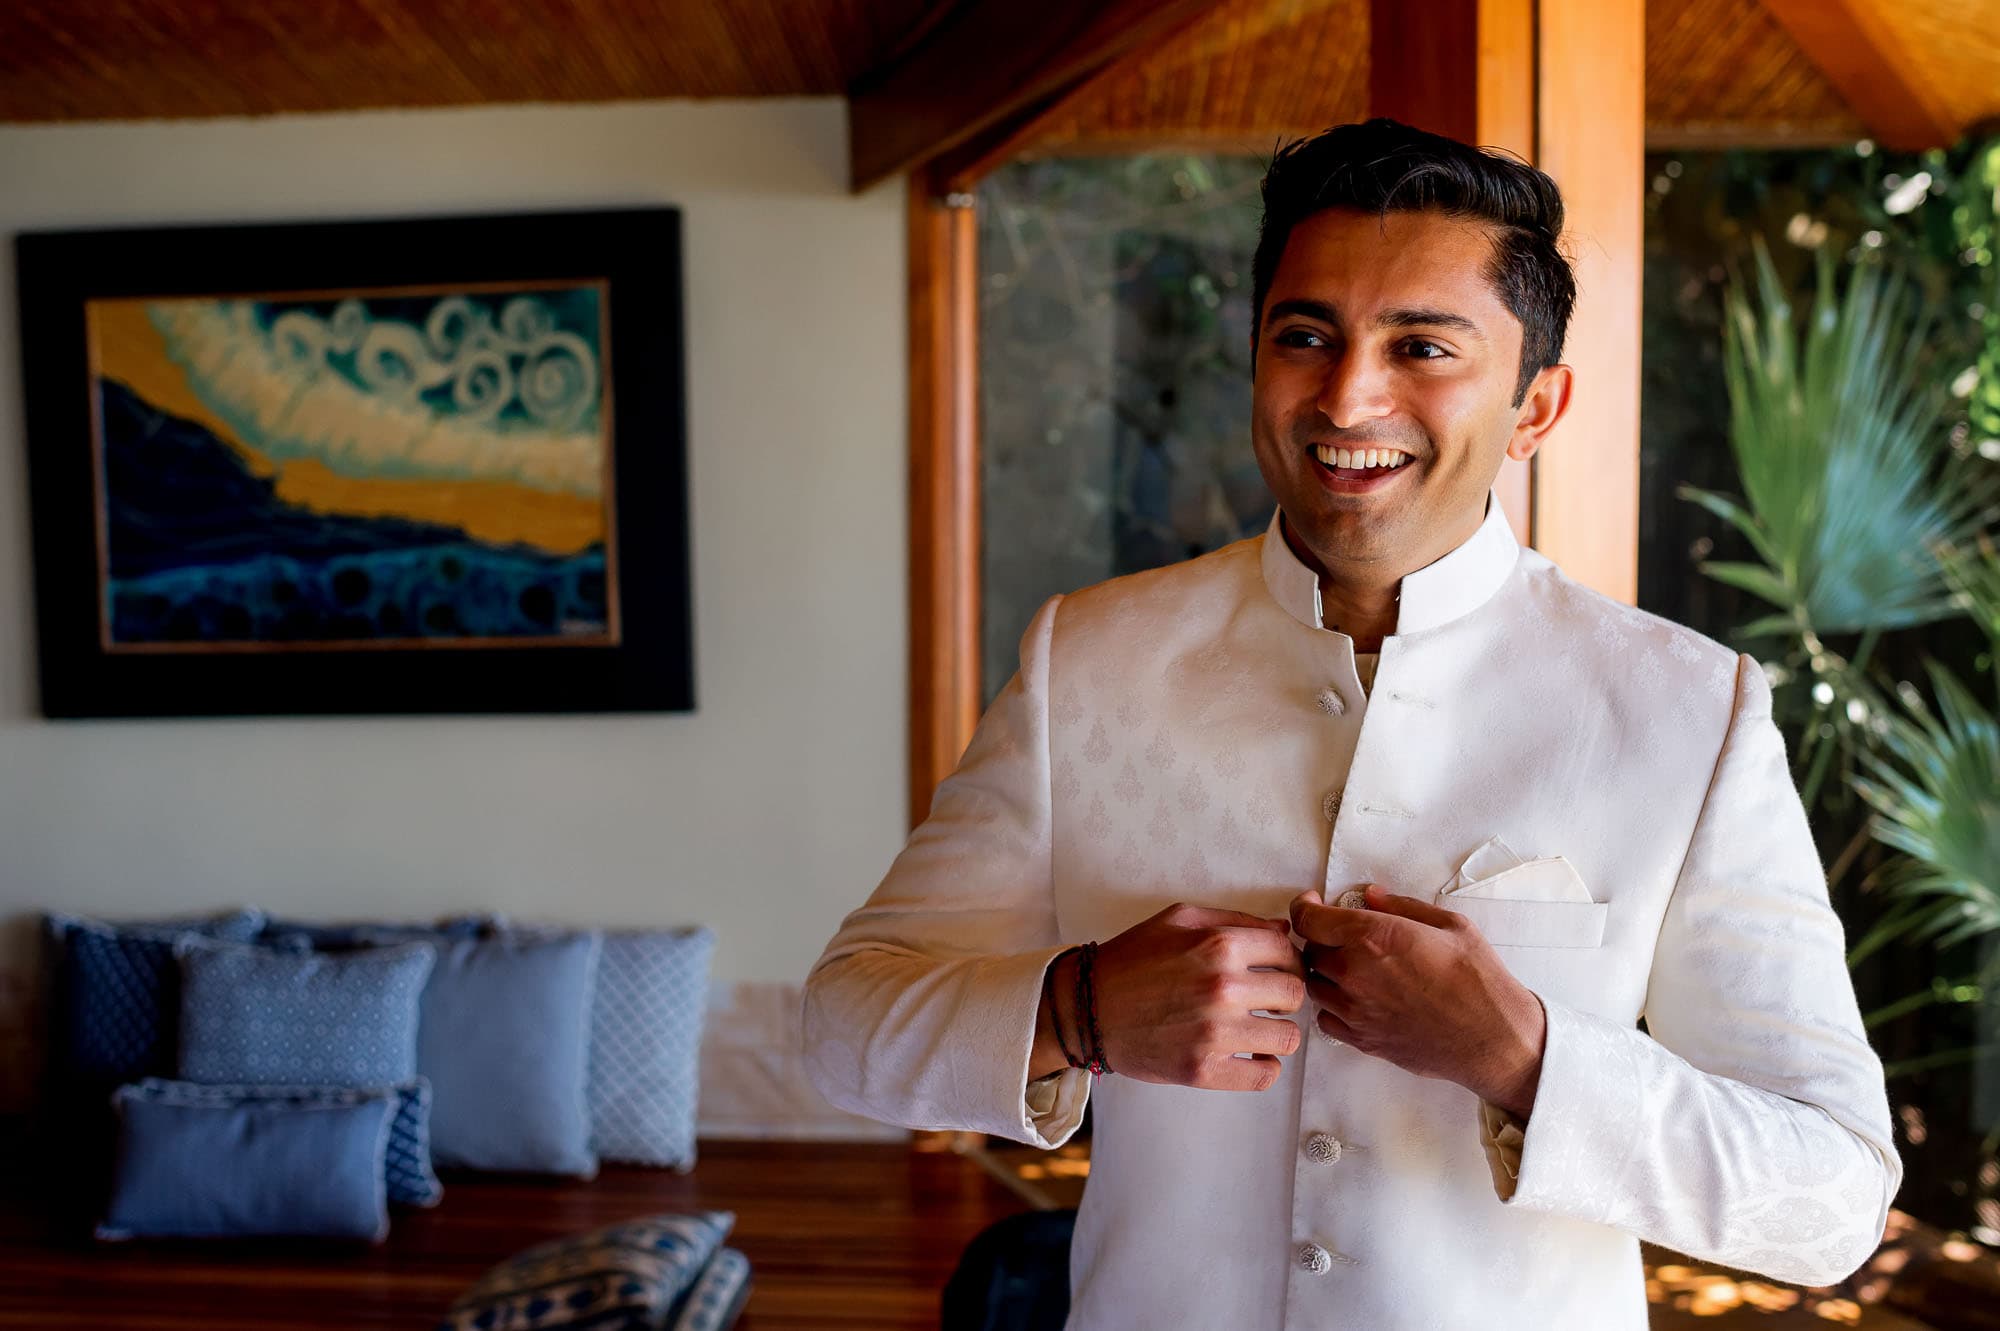 The groom ready for his traditional Hindu Muslim wedding ceremony.